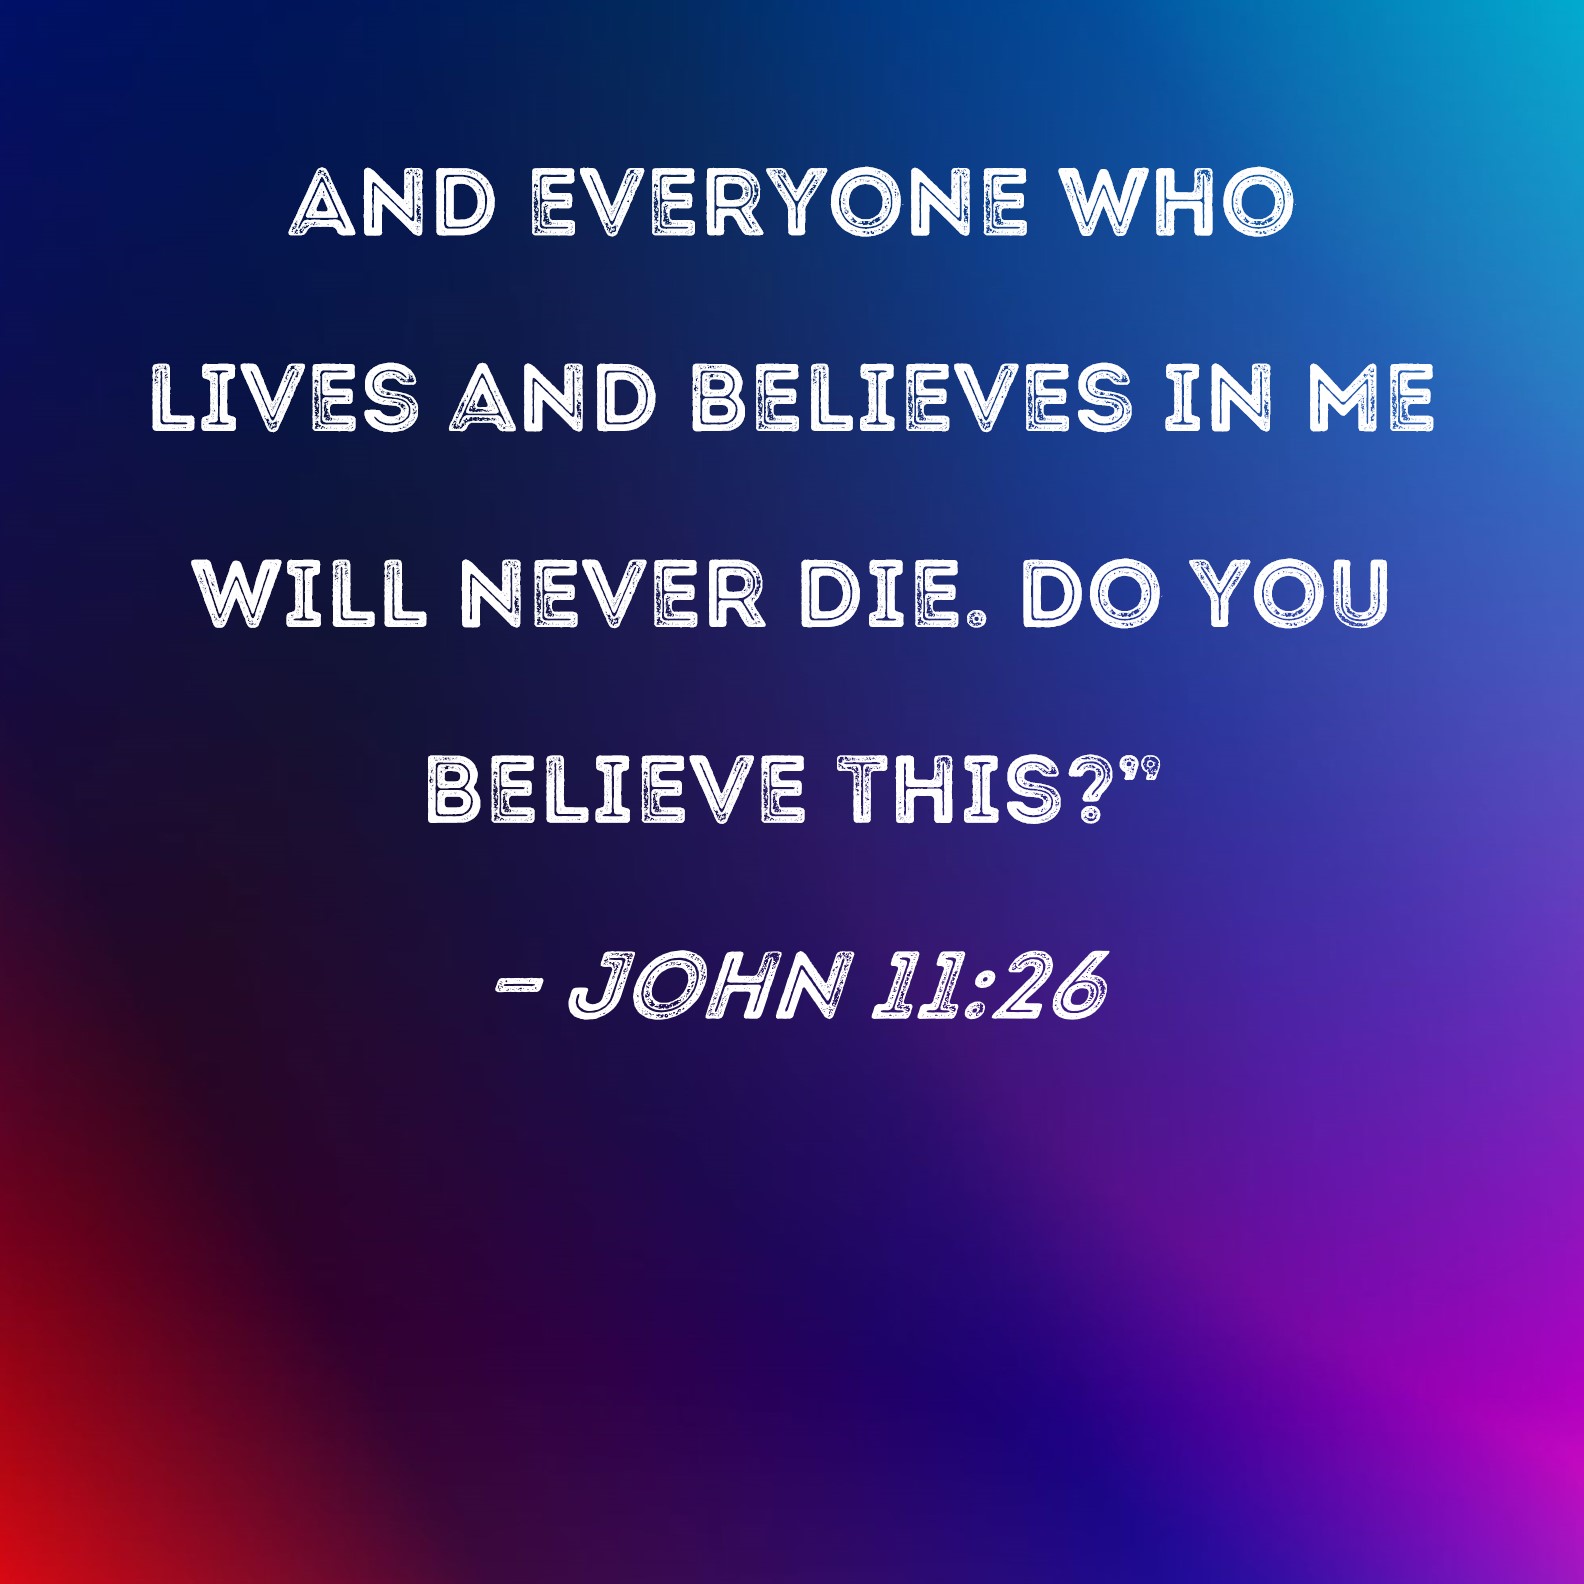 John 11:26 And everyone who lives and believes in Me will never